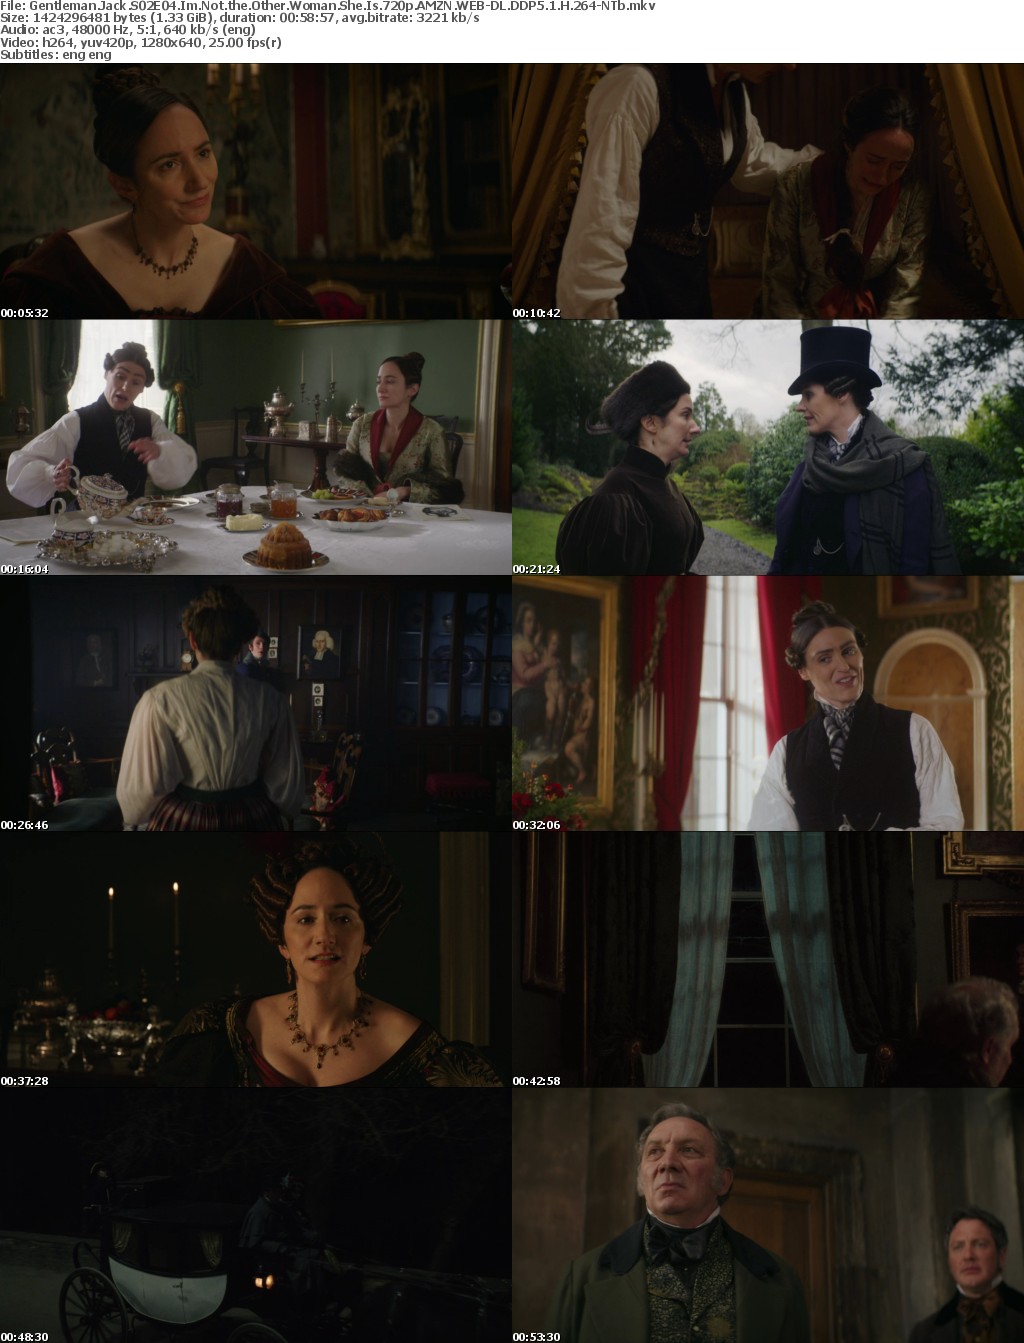 Gentleman Jack S02E04 Im Not the Other Woman She Is 720p AMZN WEBRip DDP5 1 x264-NTb